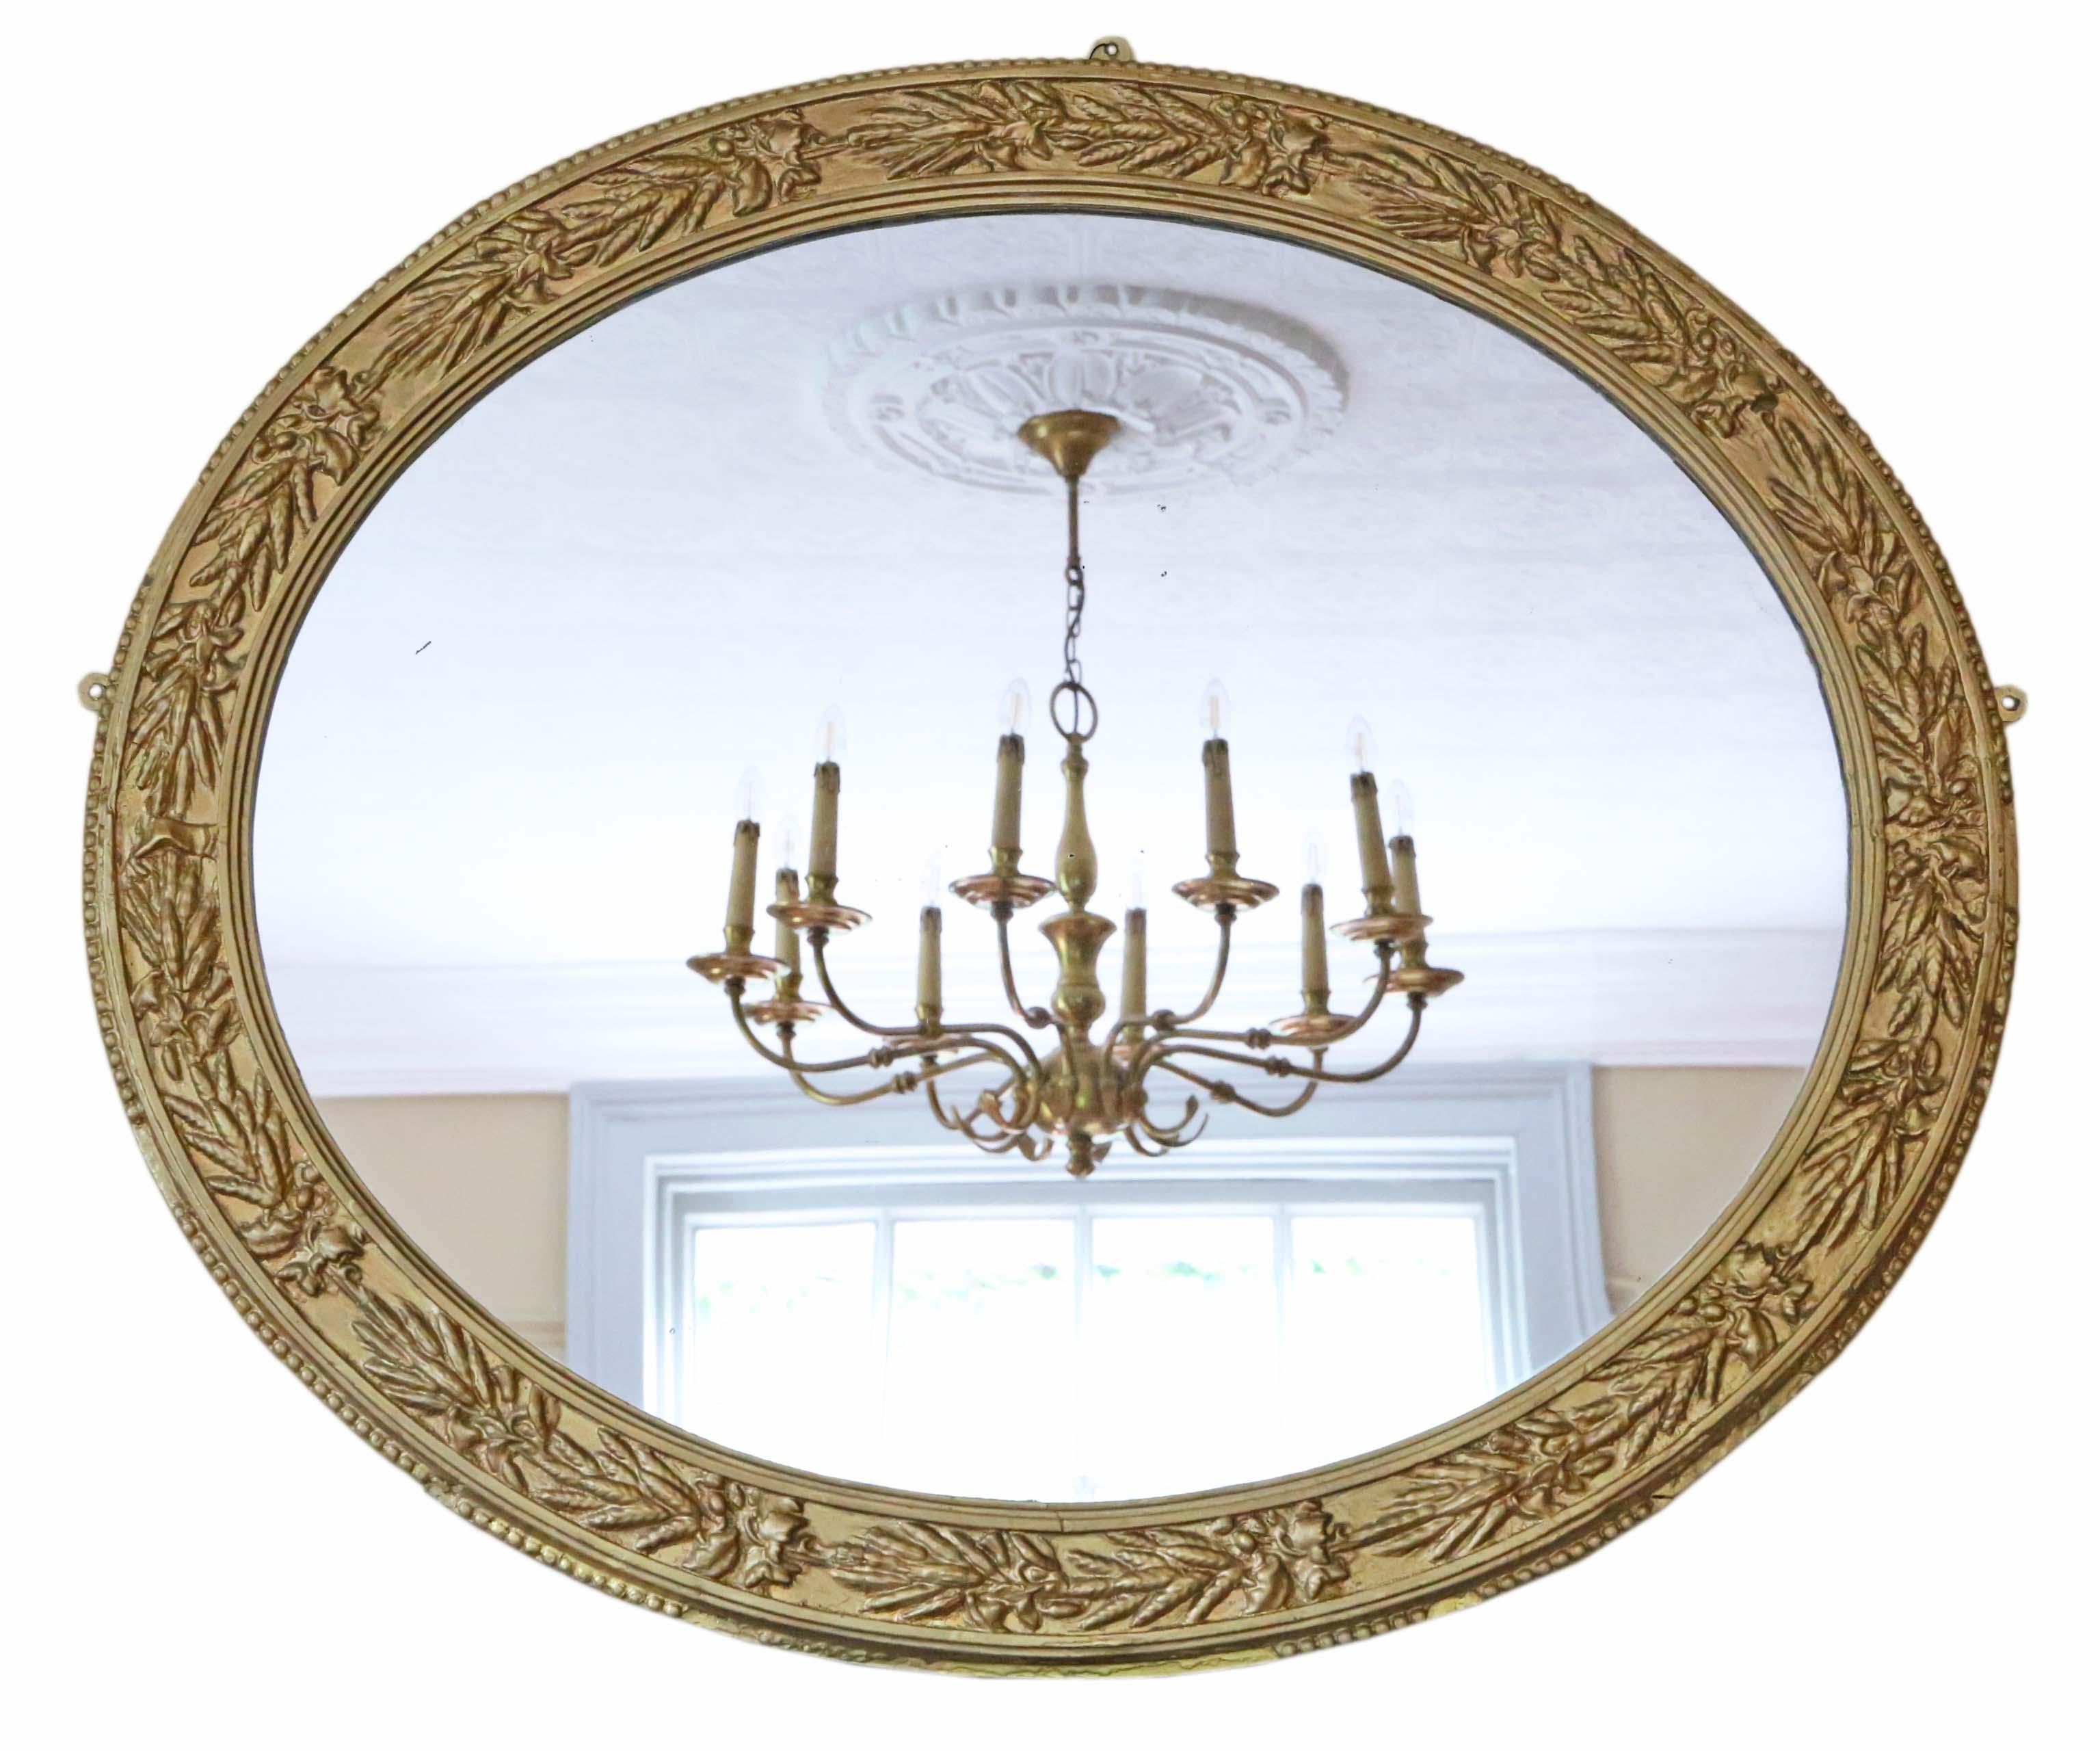 Large Oval Mid-19th Century Victorian Gilt Overmantle Wall Mirror 3